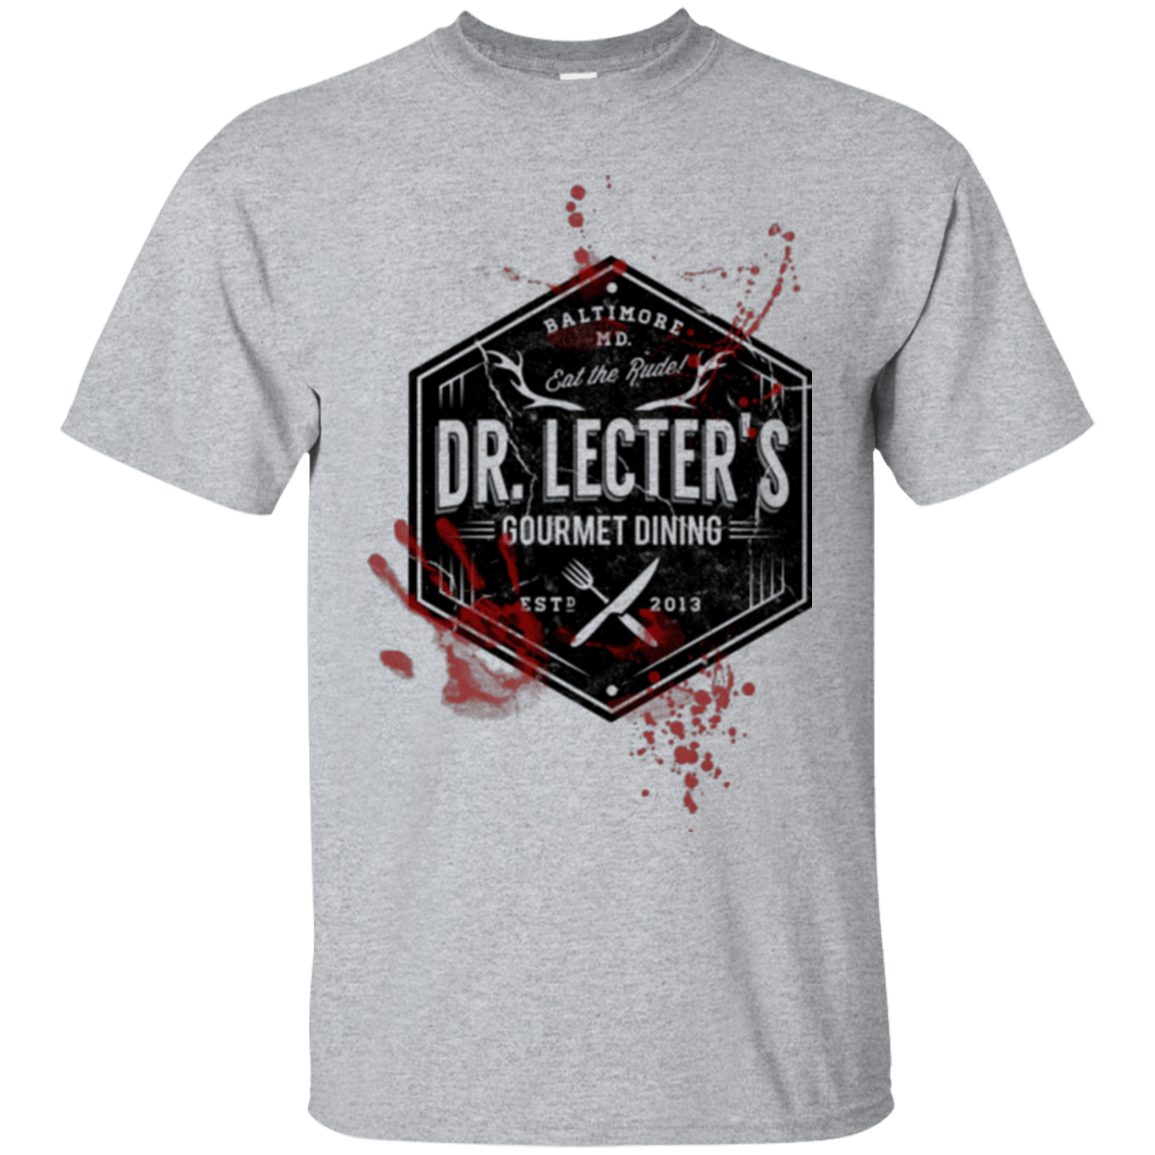 T-Shirts Sport Grey / Small Dr. Lecter's Gourmet Dining T-Shirt